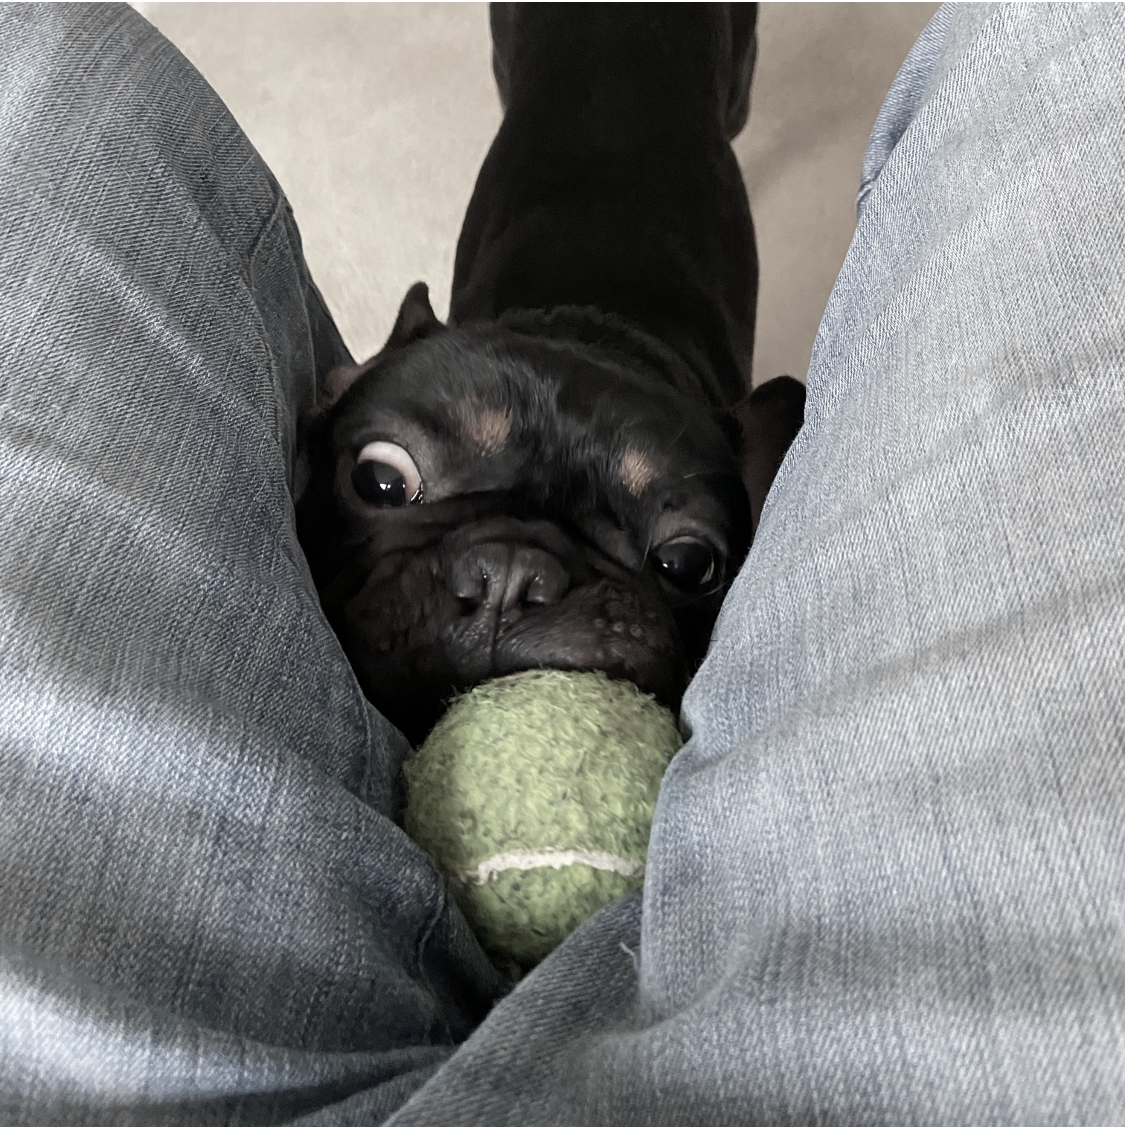 Ralph wants to play with the ball